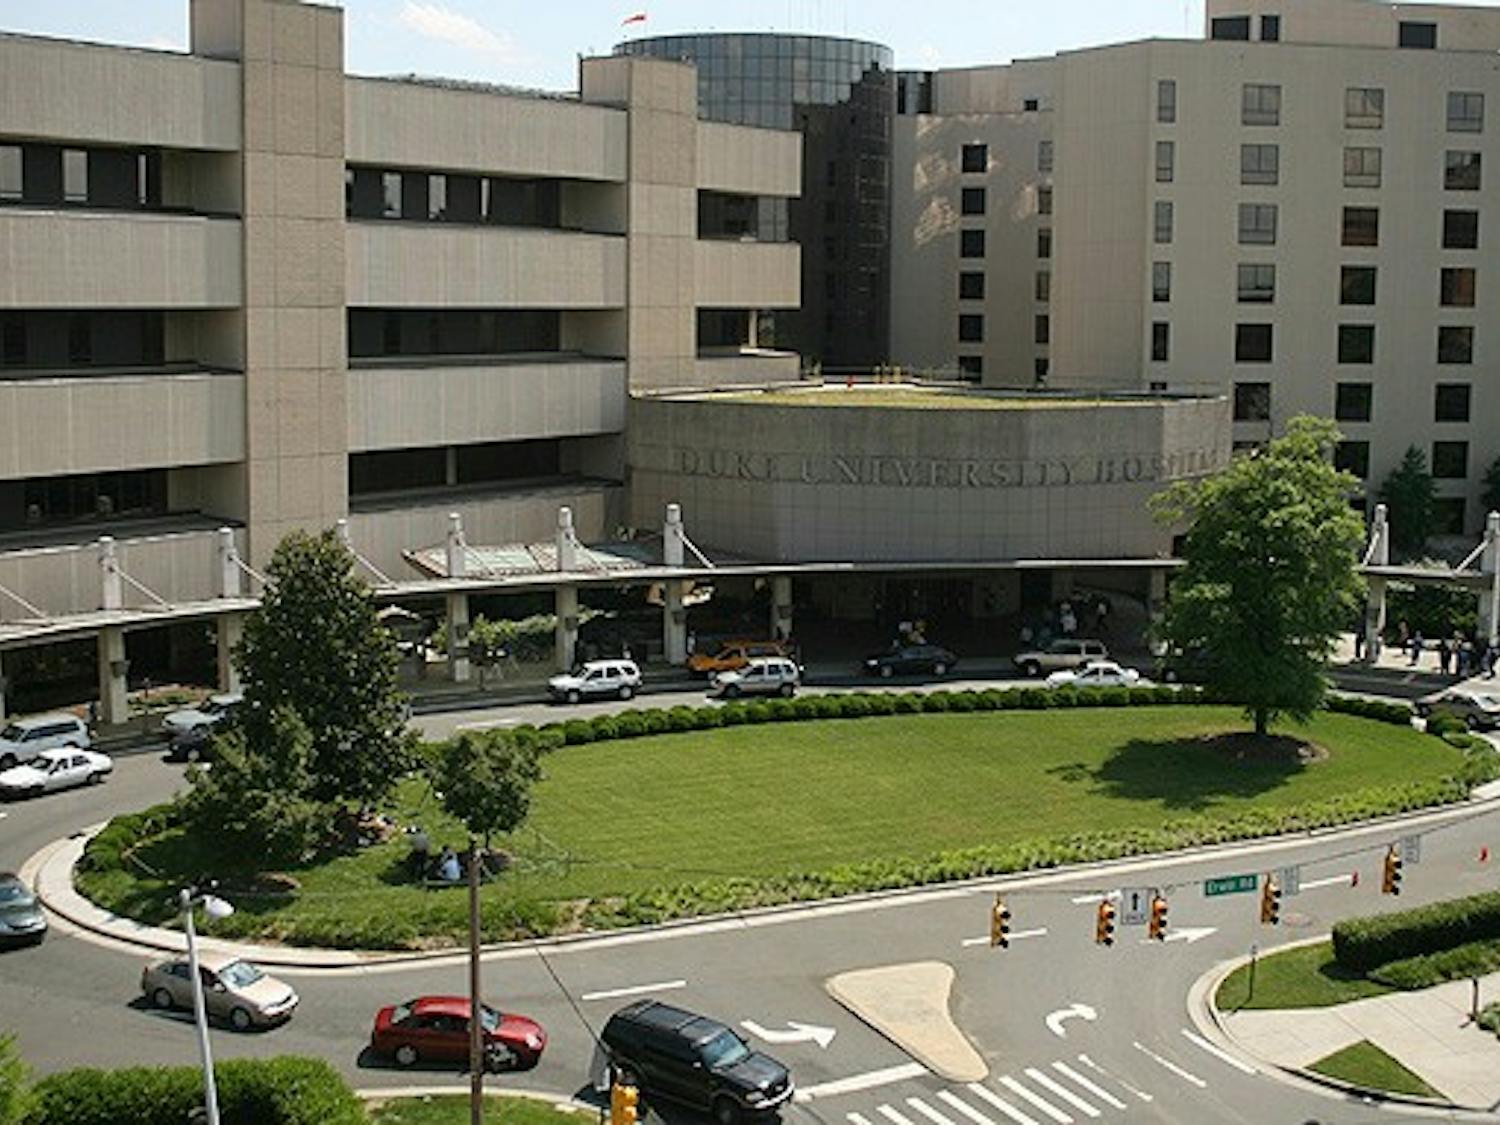 The main entrance to Duke University Hospital was barricaded after a man was shot dead by a Duke Police officer at 1 a.m. Saturday morning. DUPD identified the officers involved as Larry Carter and Jeffrey Liberto, but has yet to announce the identity of the individual who died.